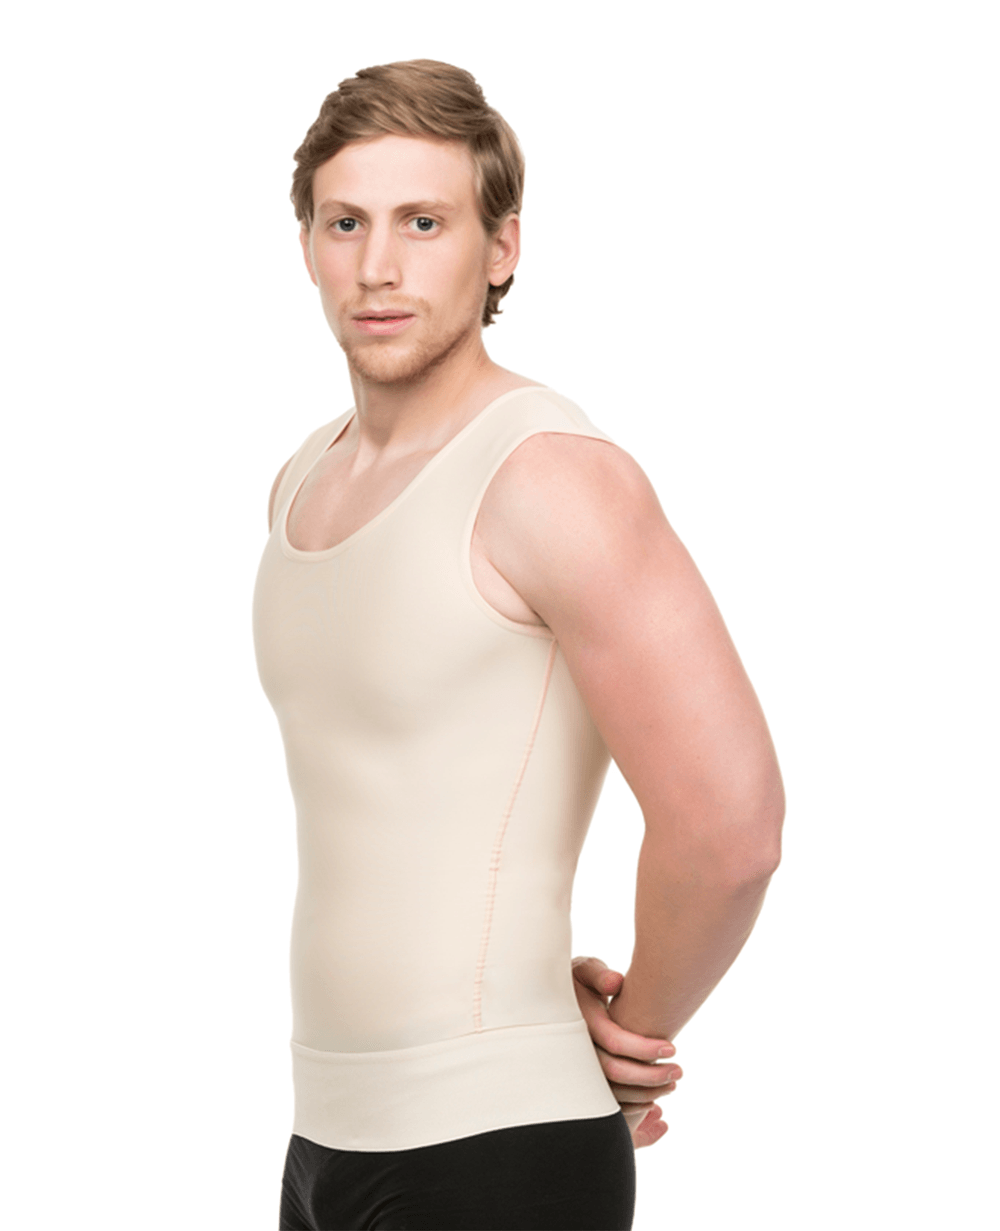 2nd Stage Male Abdominal Cosmetic Surgery Compression Vest with 3" Elastic Waist Band (MG05)